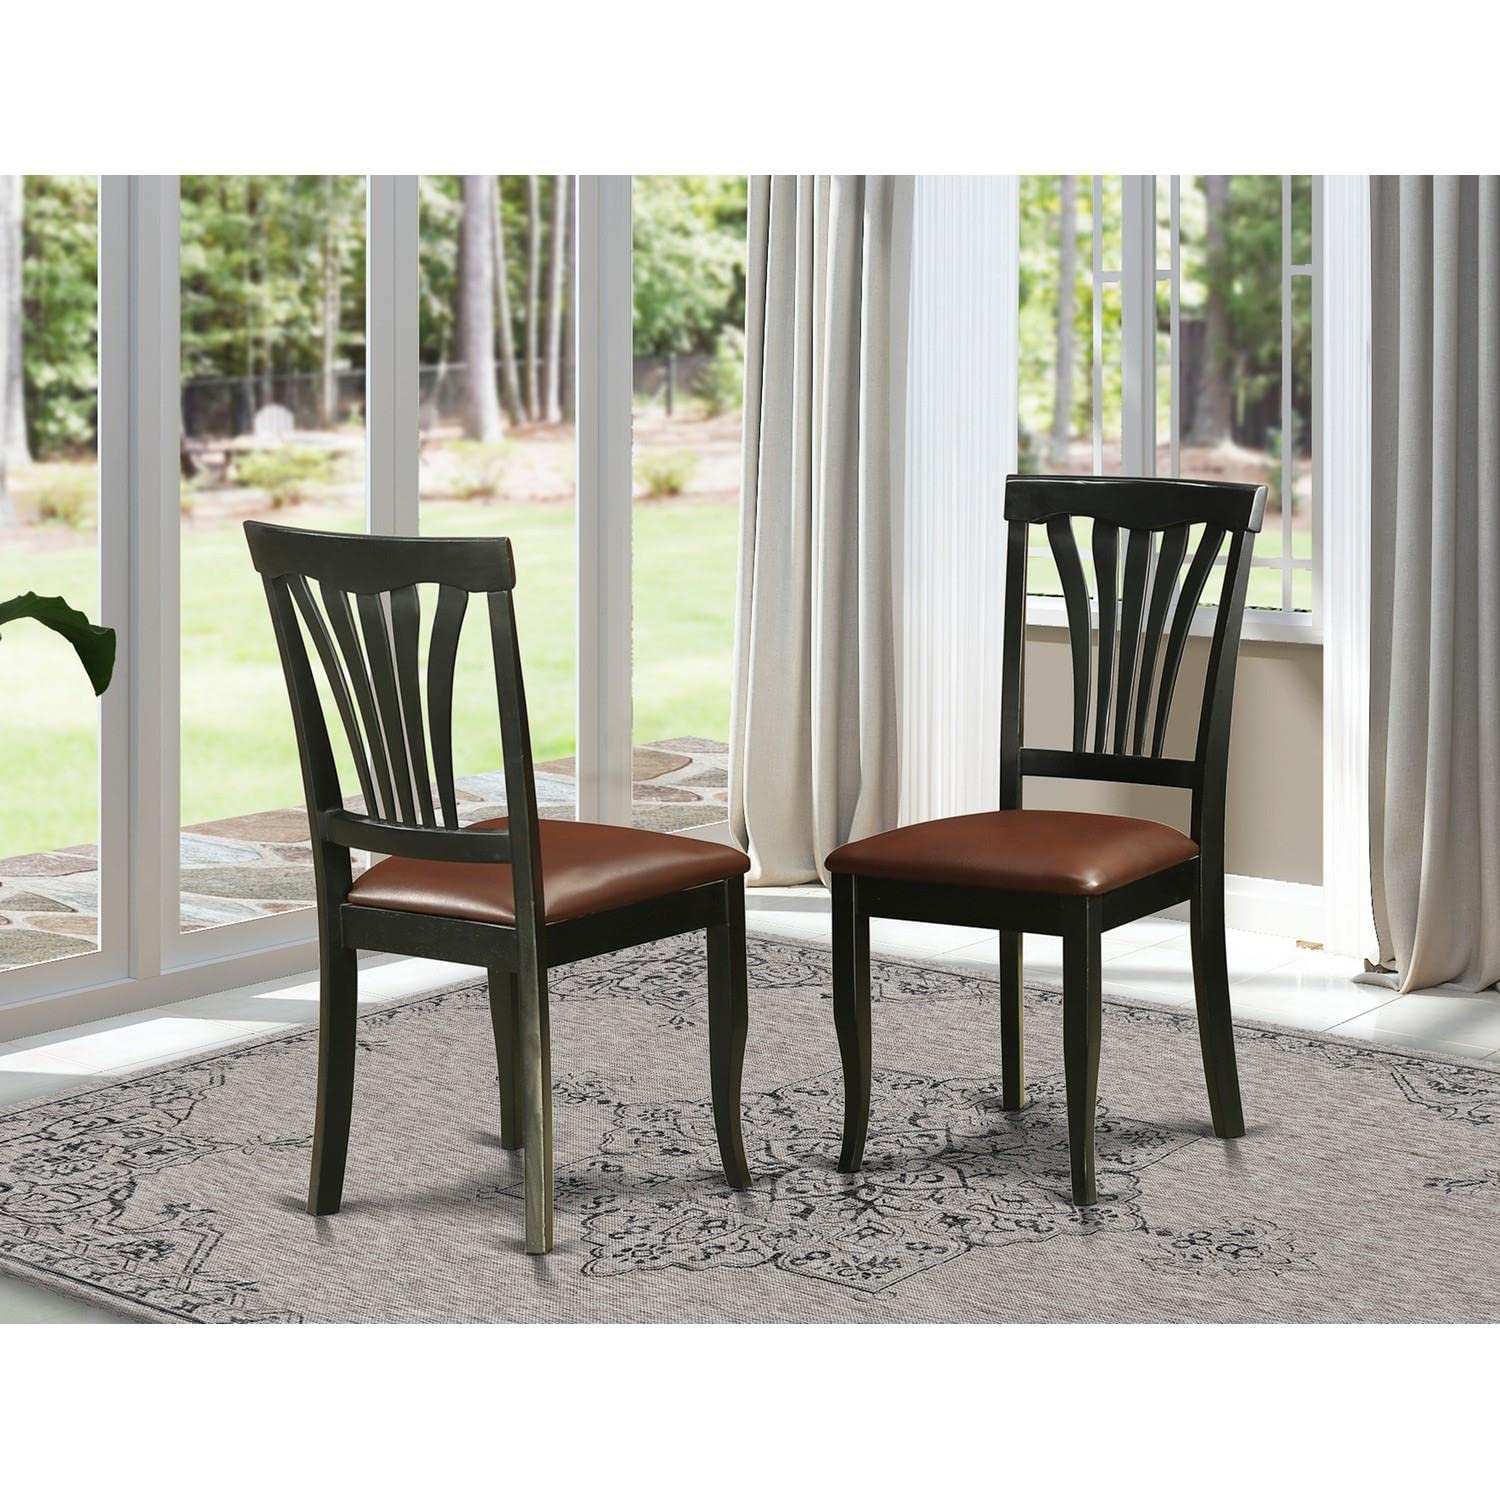 East West Furniture AVC-BLK-LC Dining Faux Leather Upholstered Wooden Chairs, Set of 2, Black